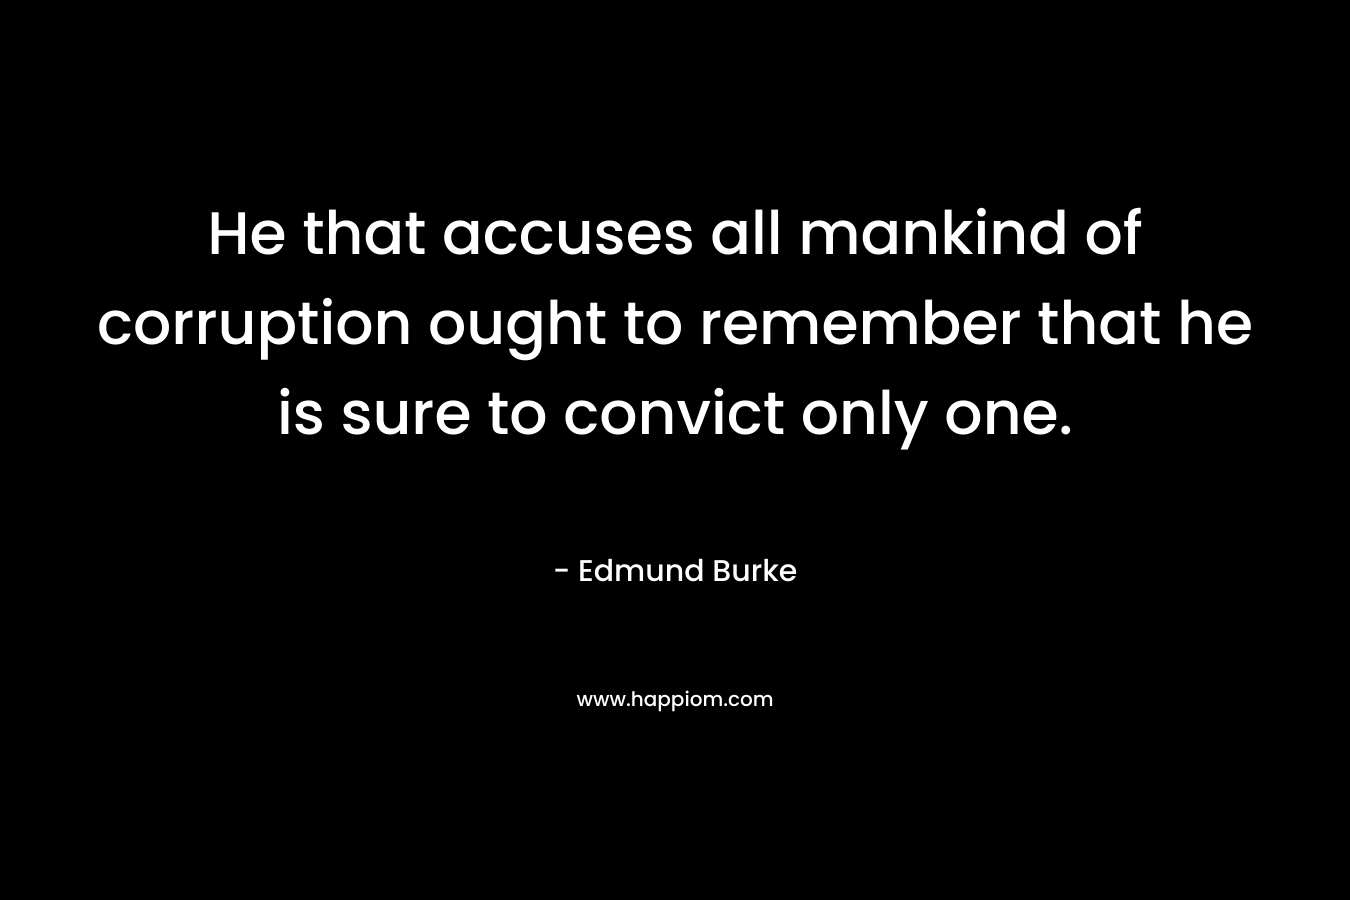 He that accuses all mankind of corruption ought to remember that he is sure to convict only one. – Edmund Burke